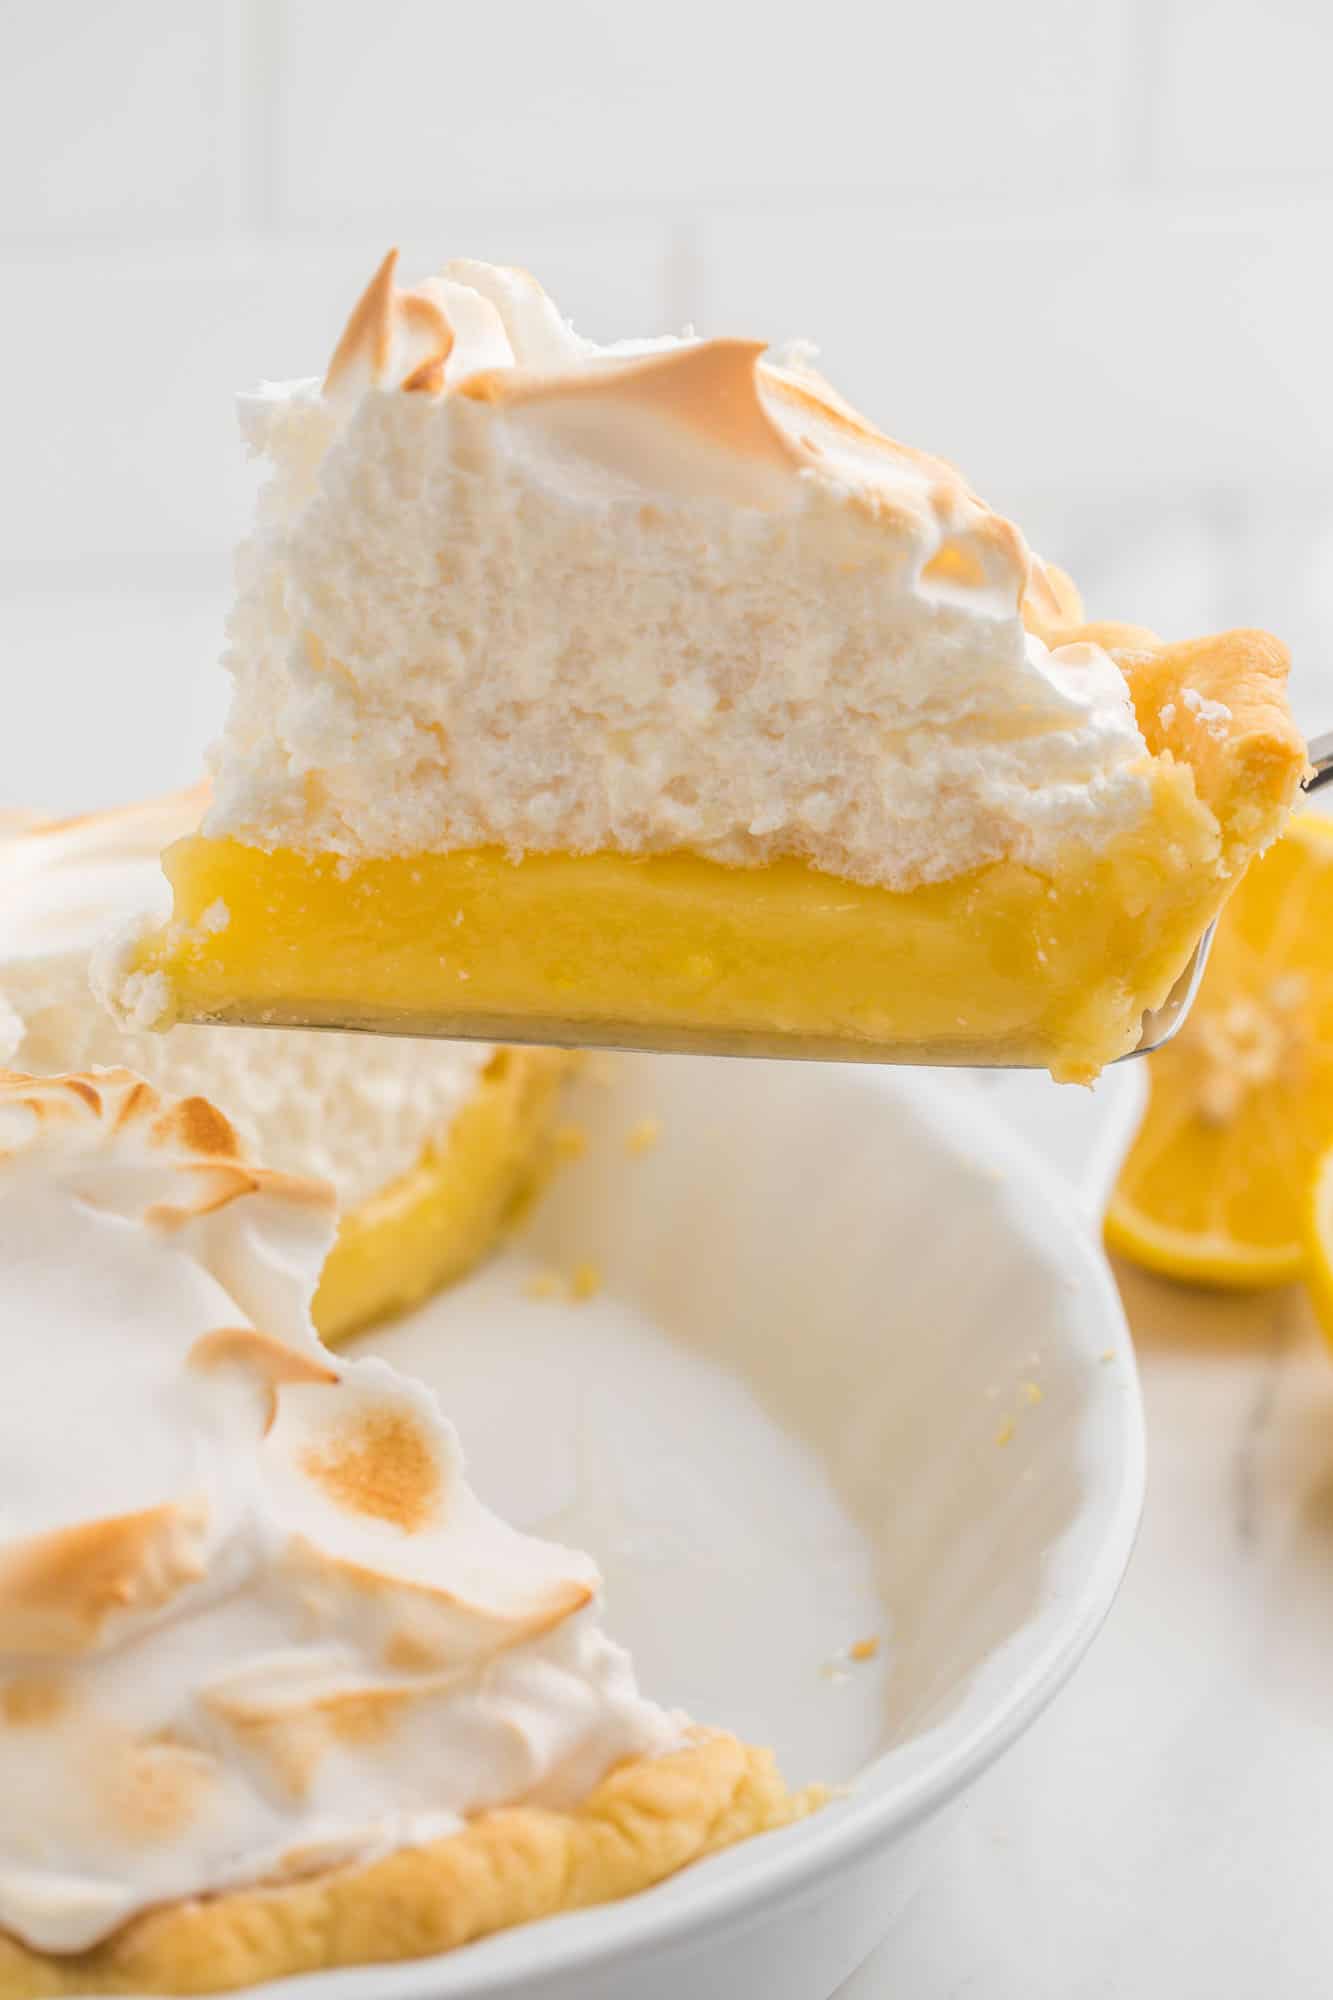 a slice of lemon meringue pie with a thick, fluffy meringue layer being lifted out of a white ceramic pie plate